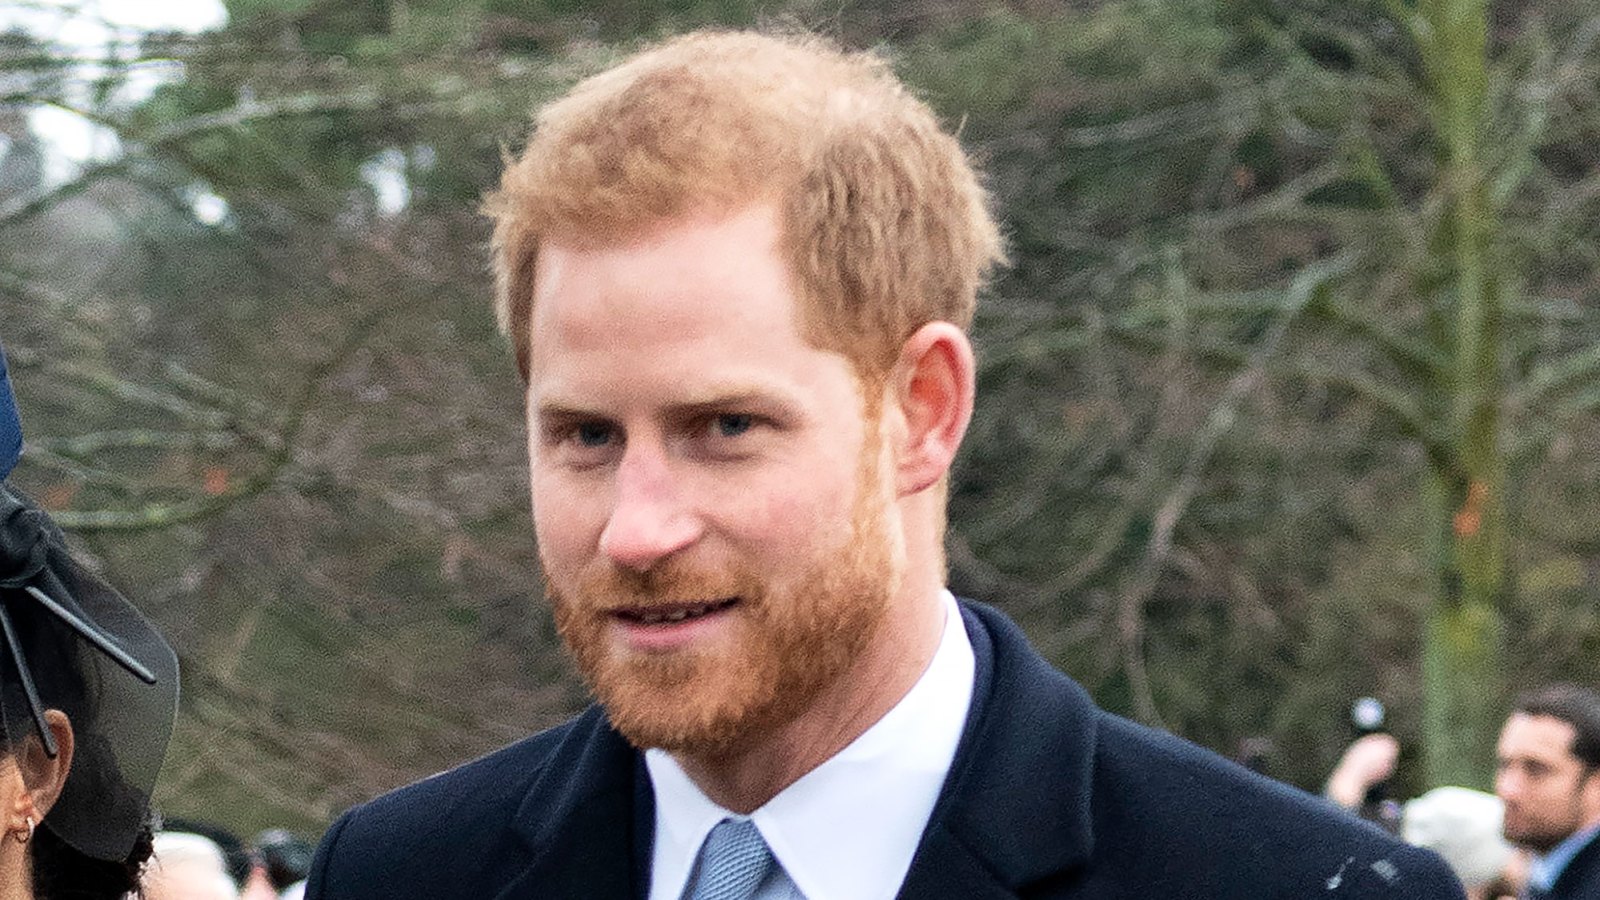 Prince Harry Participated in the Royal Family’s Boxing Day Hunt Despite Reports